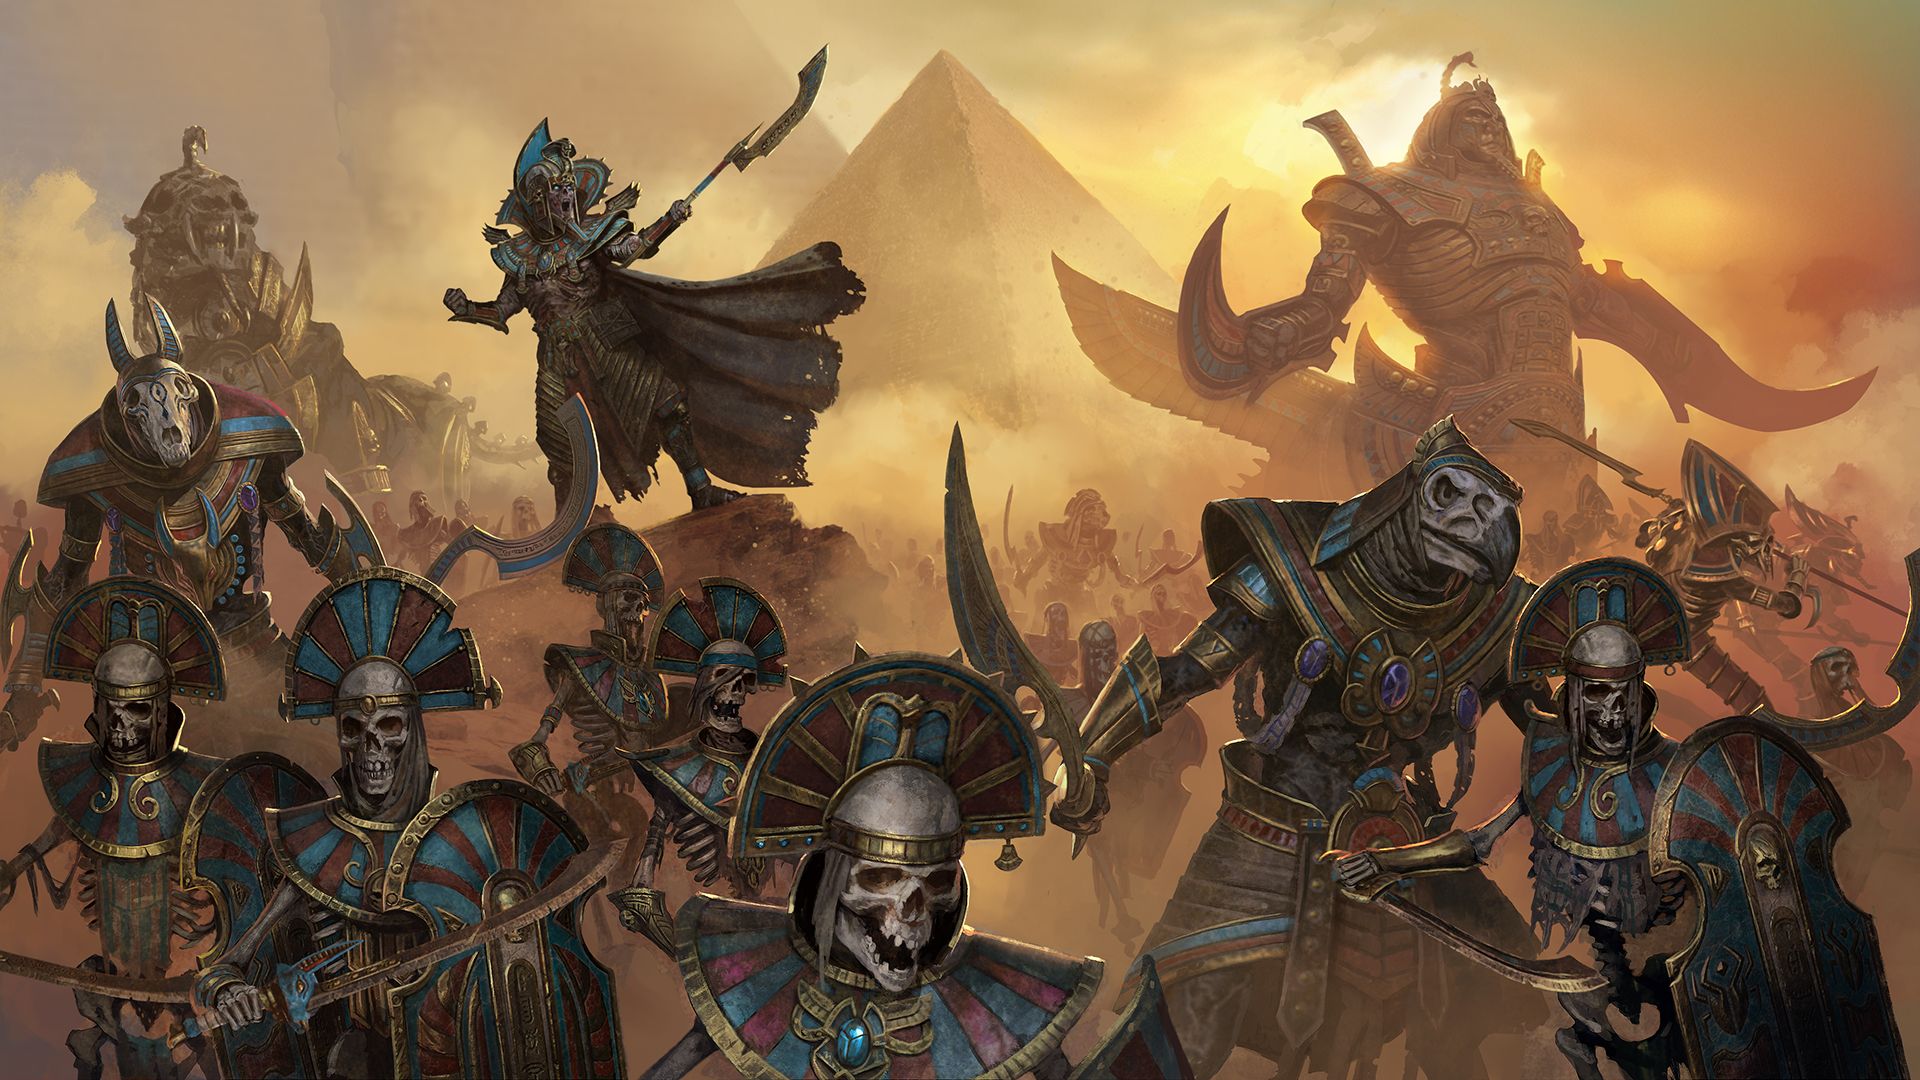 The Tomb Kings Wallpaper from the blog .reddit.com